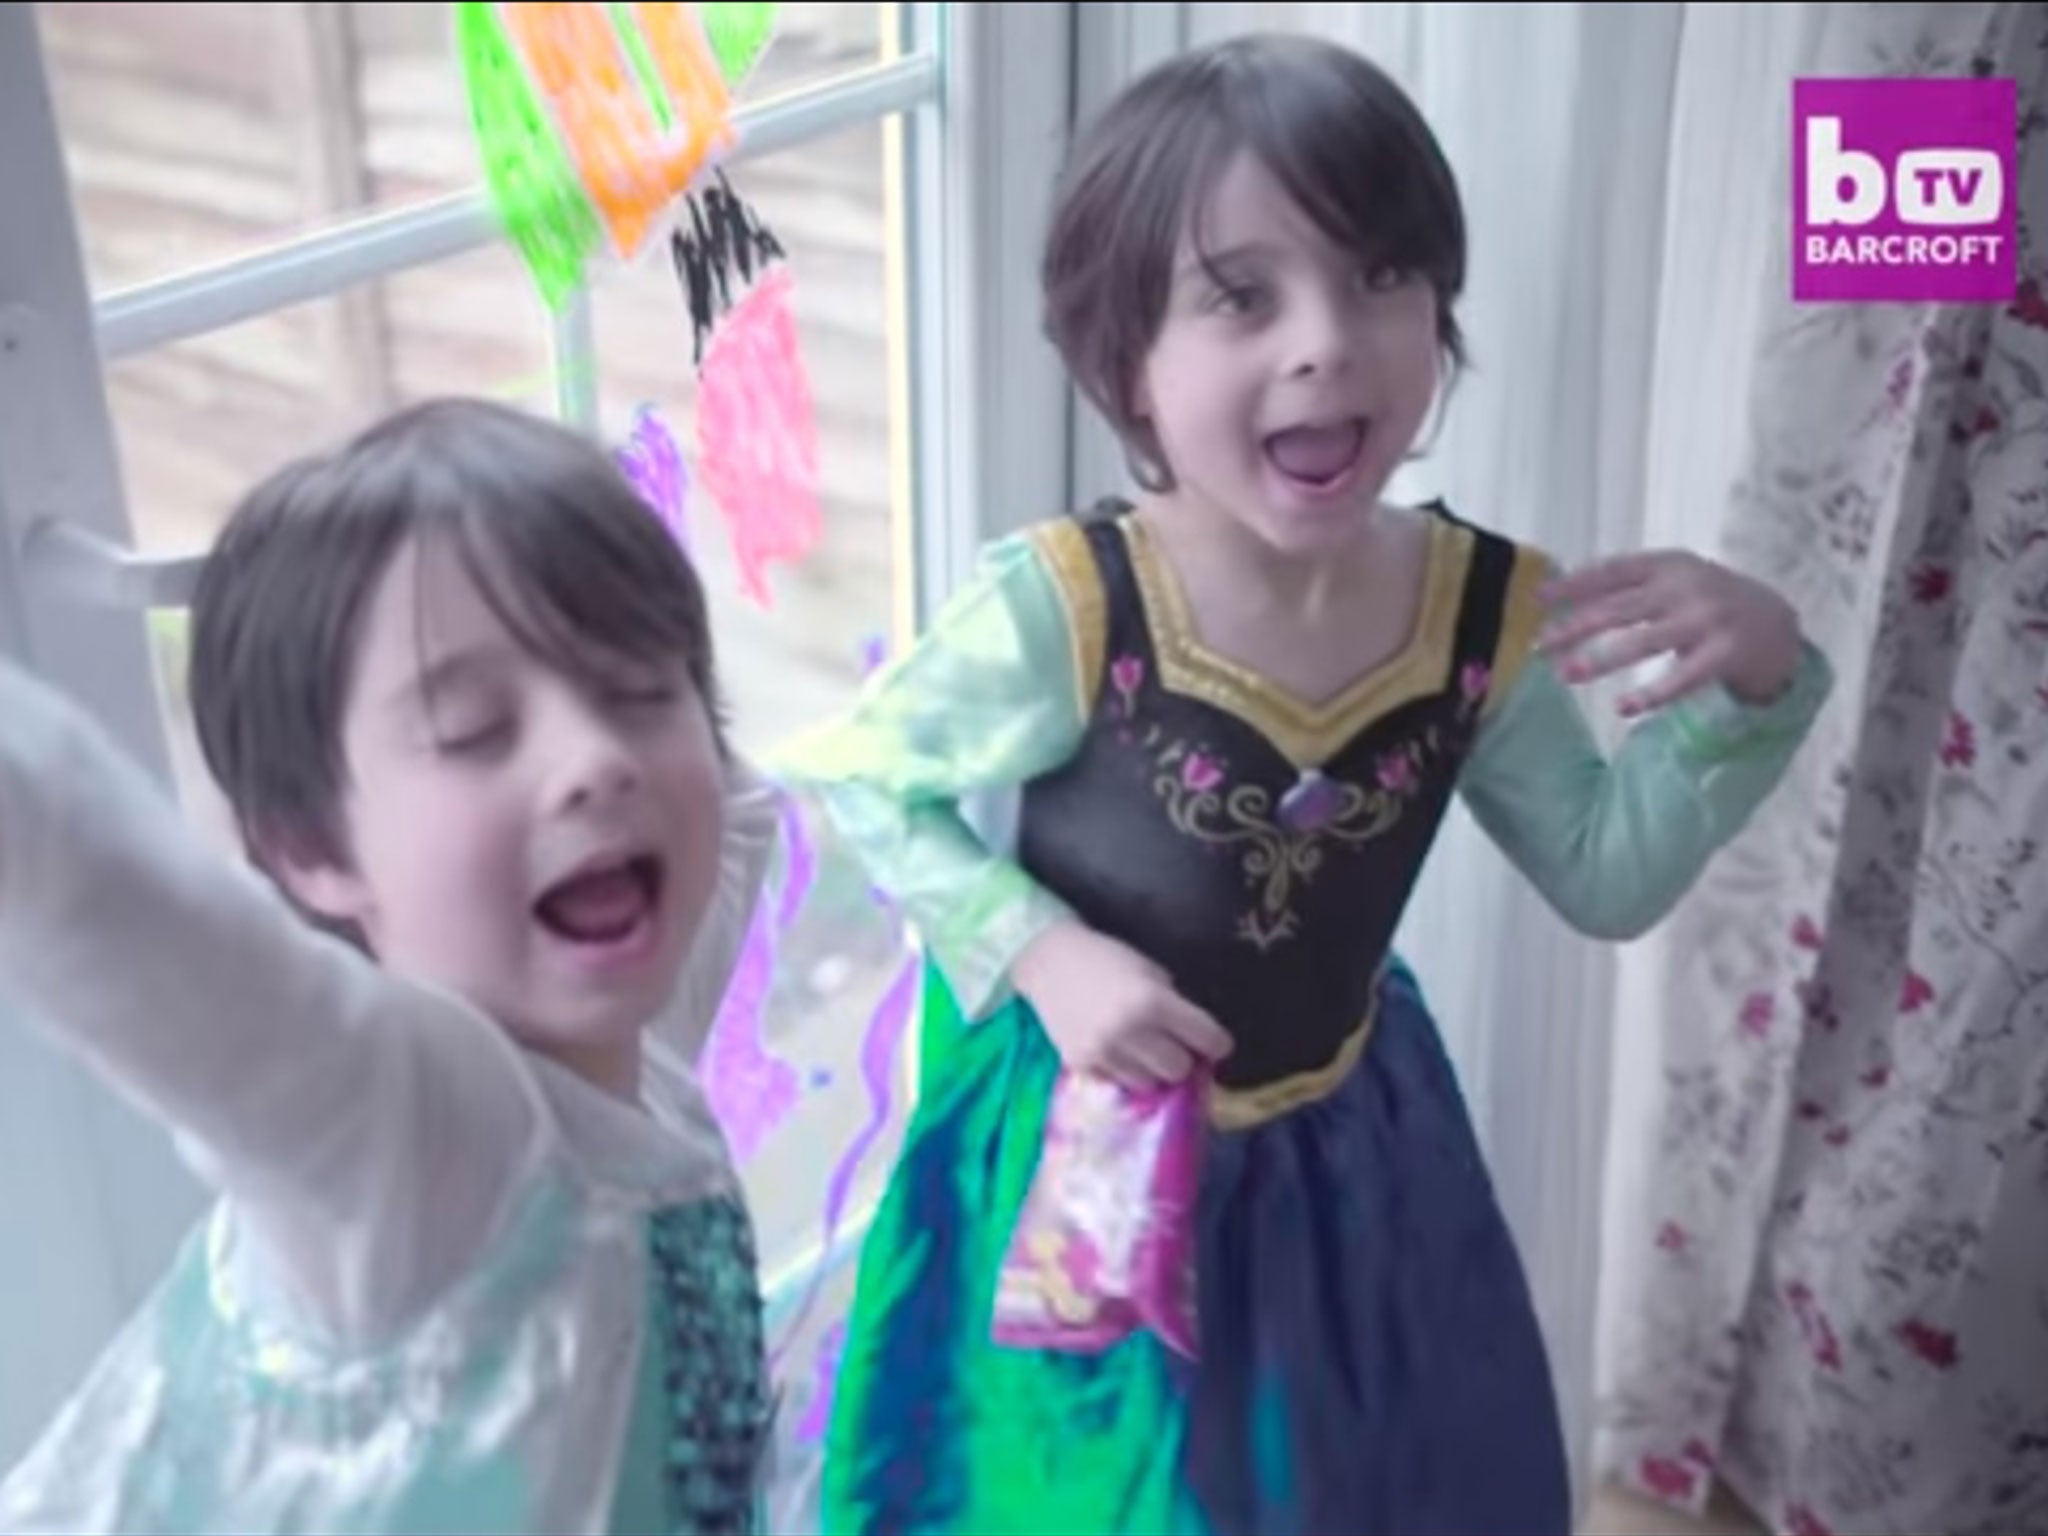 The twins dance around their family home in princess outfits